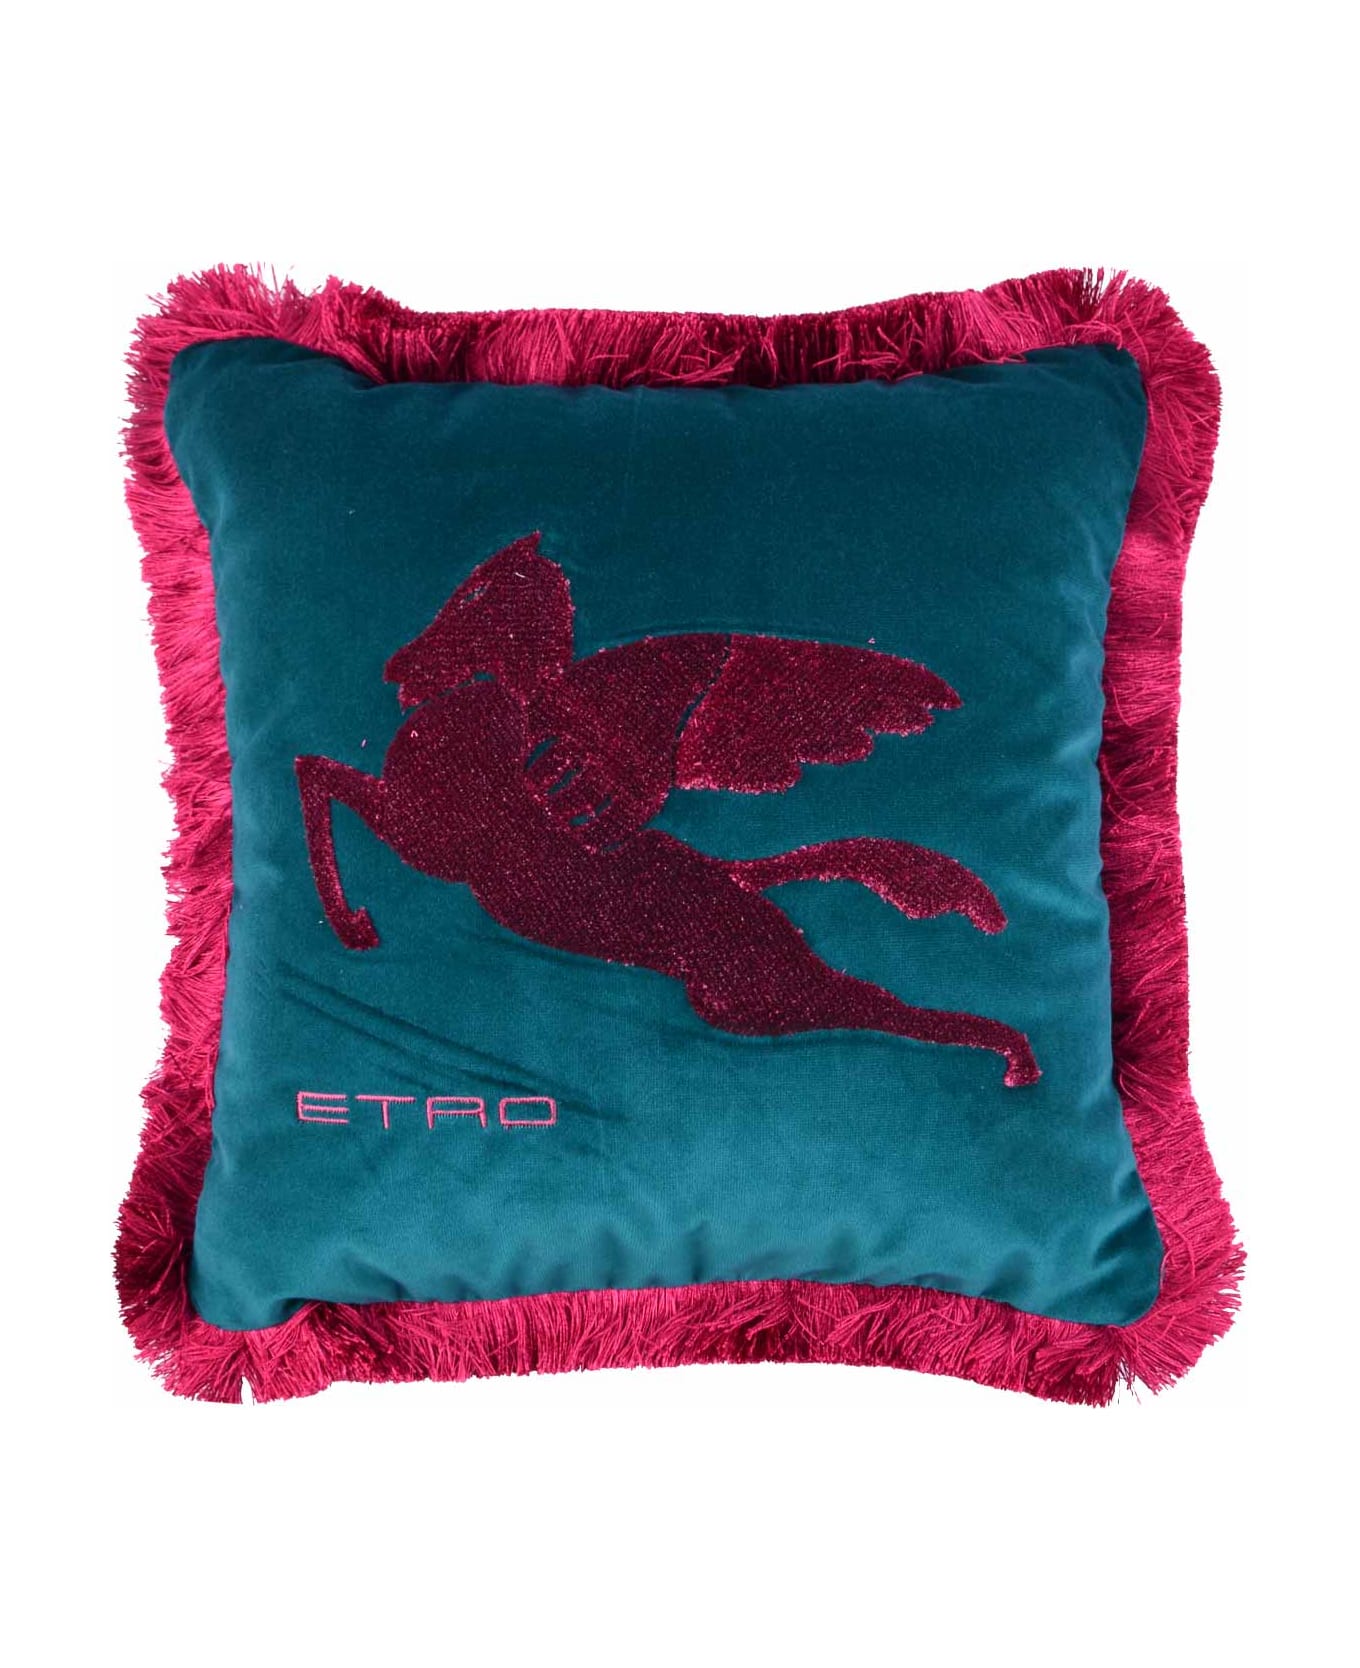 Etro Embroidered Cushion - Clear Blue クッション